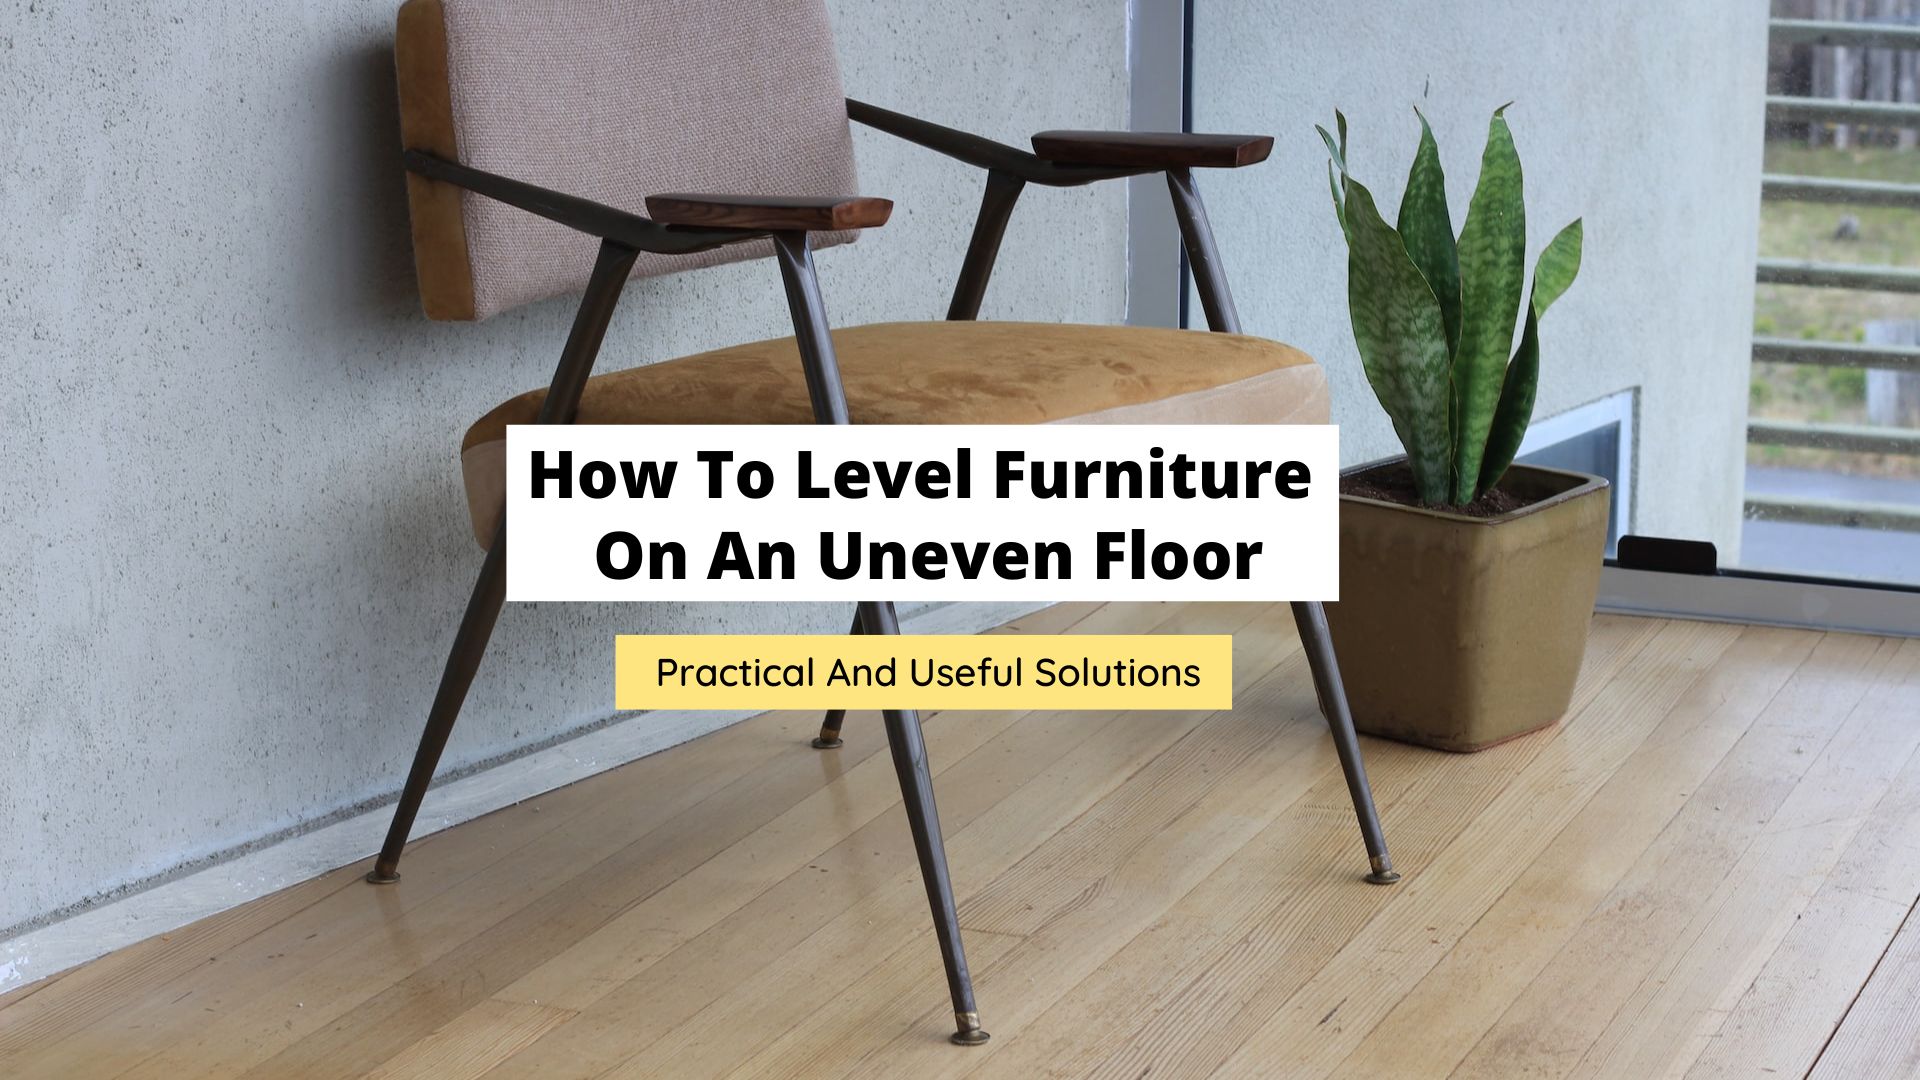 How to make furniture level on uneven floor